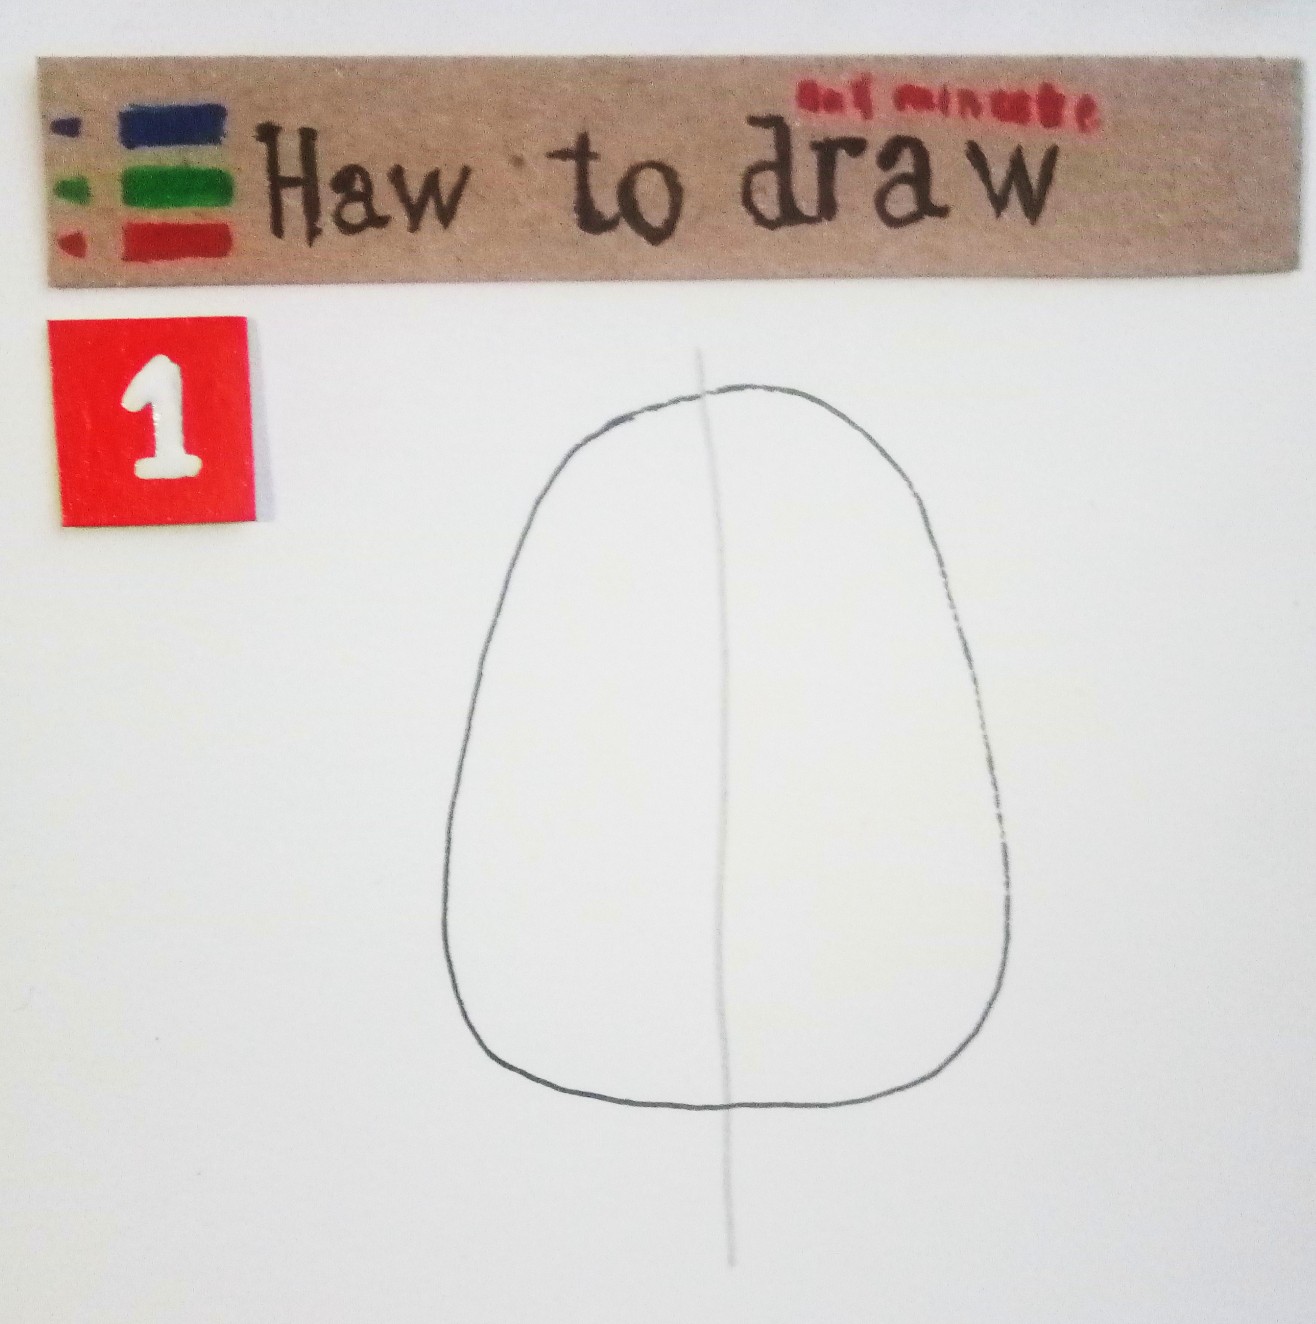 How to draw a Pusheen Cat